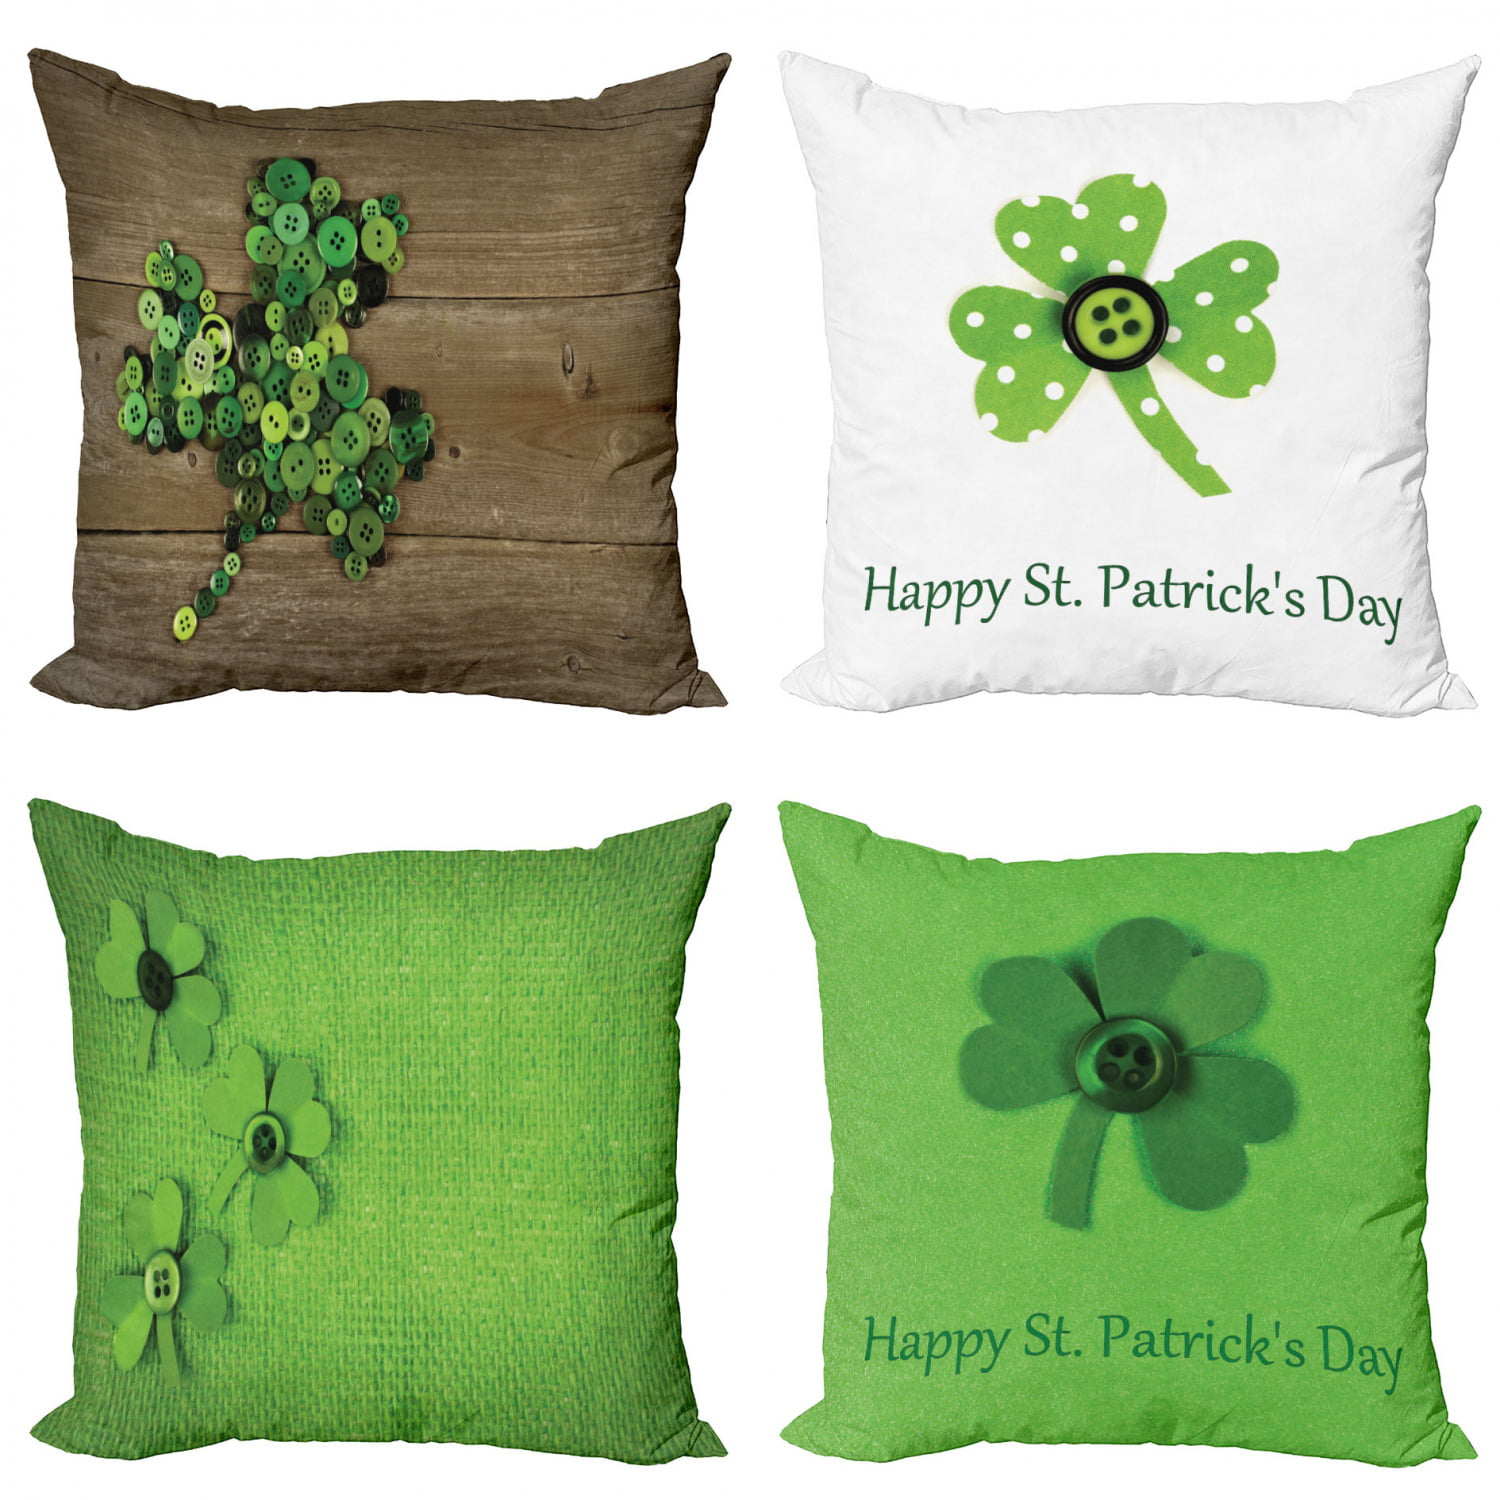 Multicolor 18x18 Lucky Shamrock Leaf St Patrick's Day Gifts Shamrock Leaf Gift for St Patrick's Day Throw Pillow